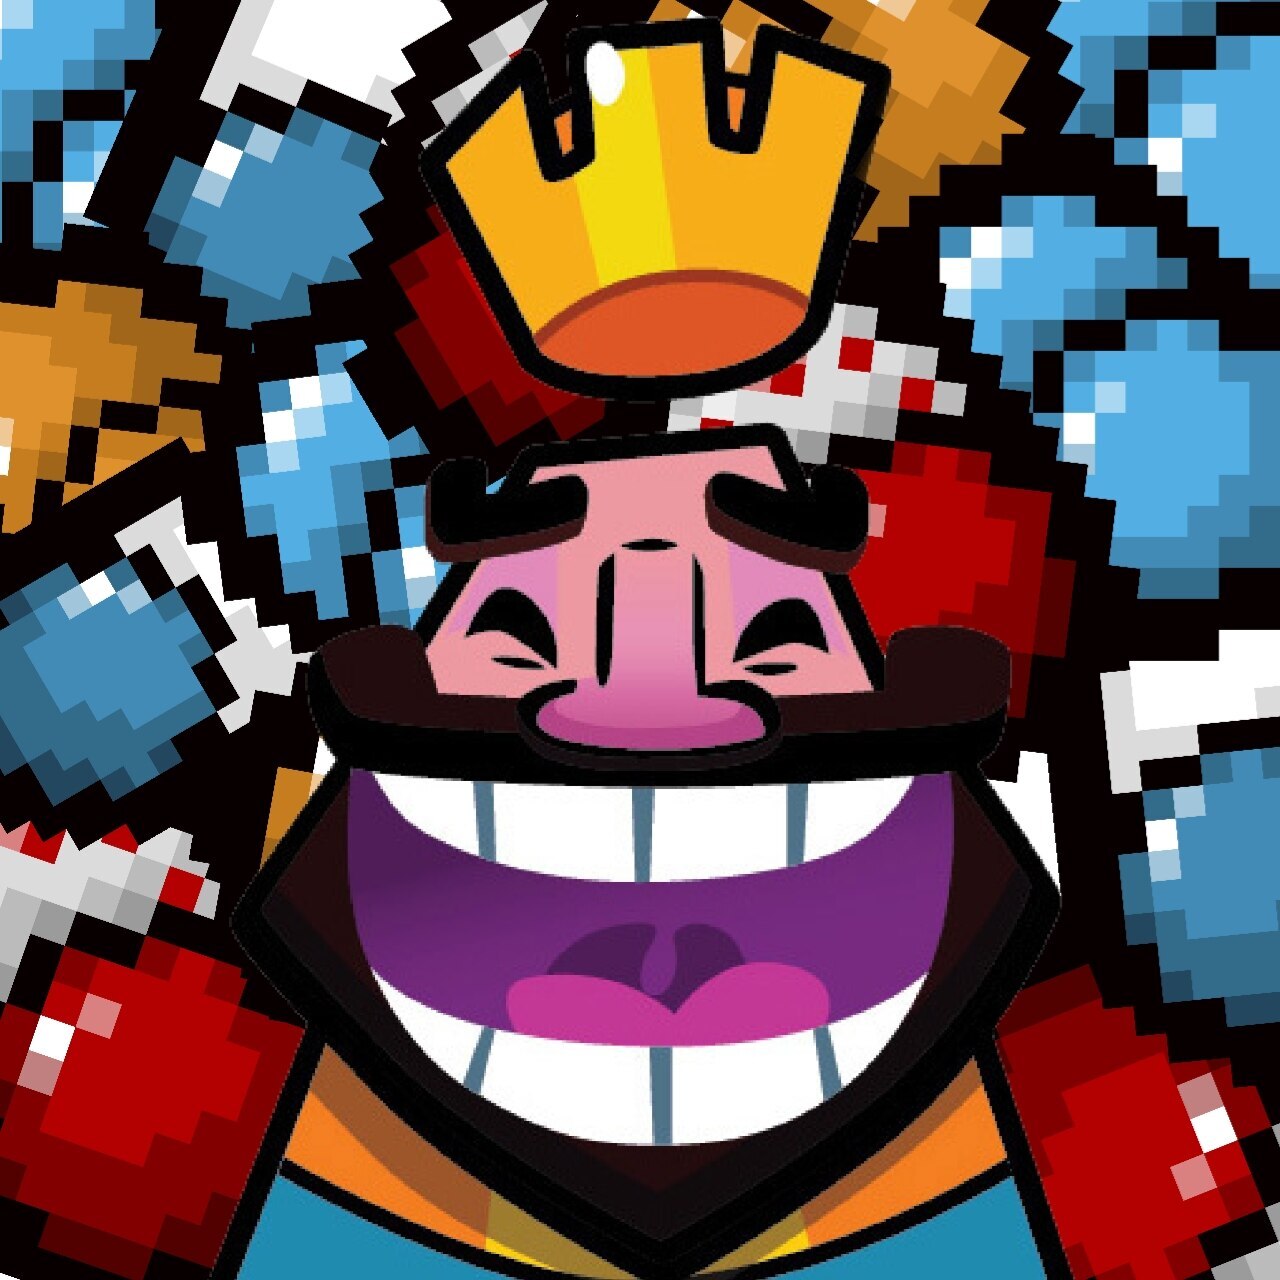 Clash Royale king laughs at you when you take bad pills. - Skymods